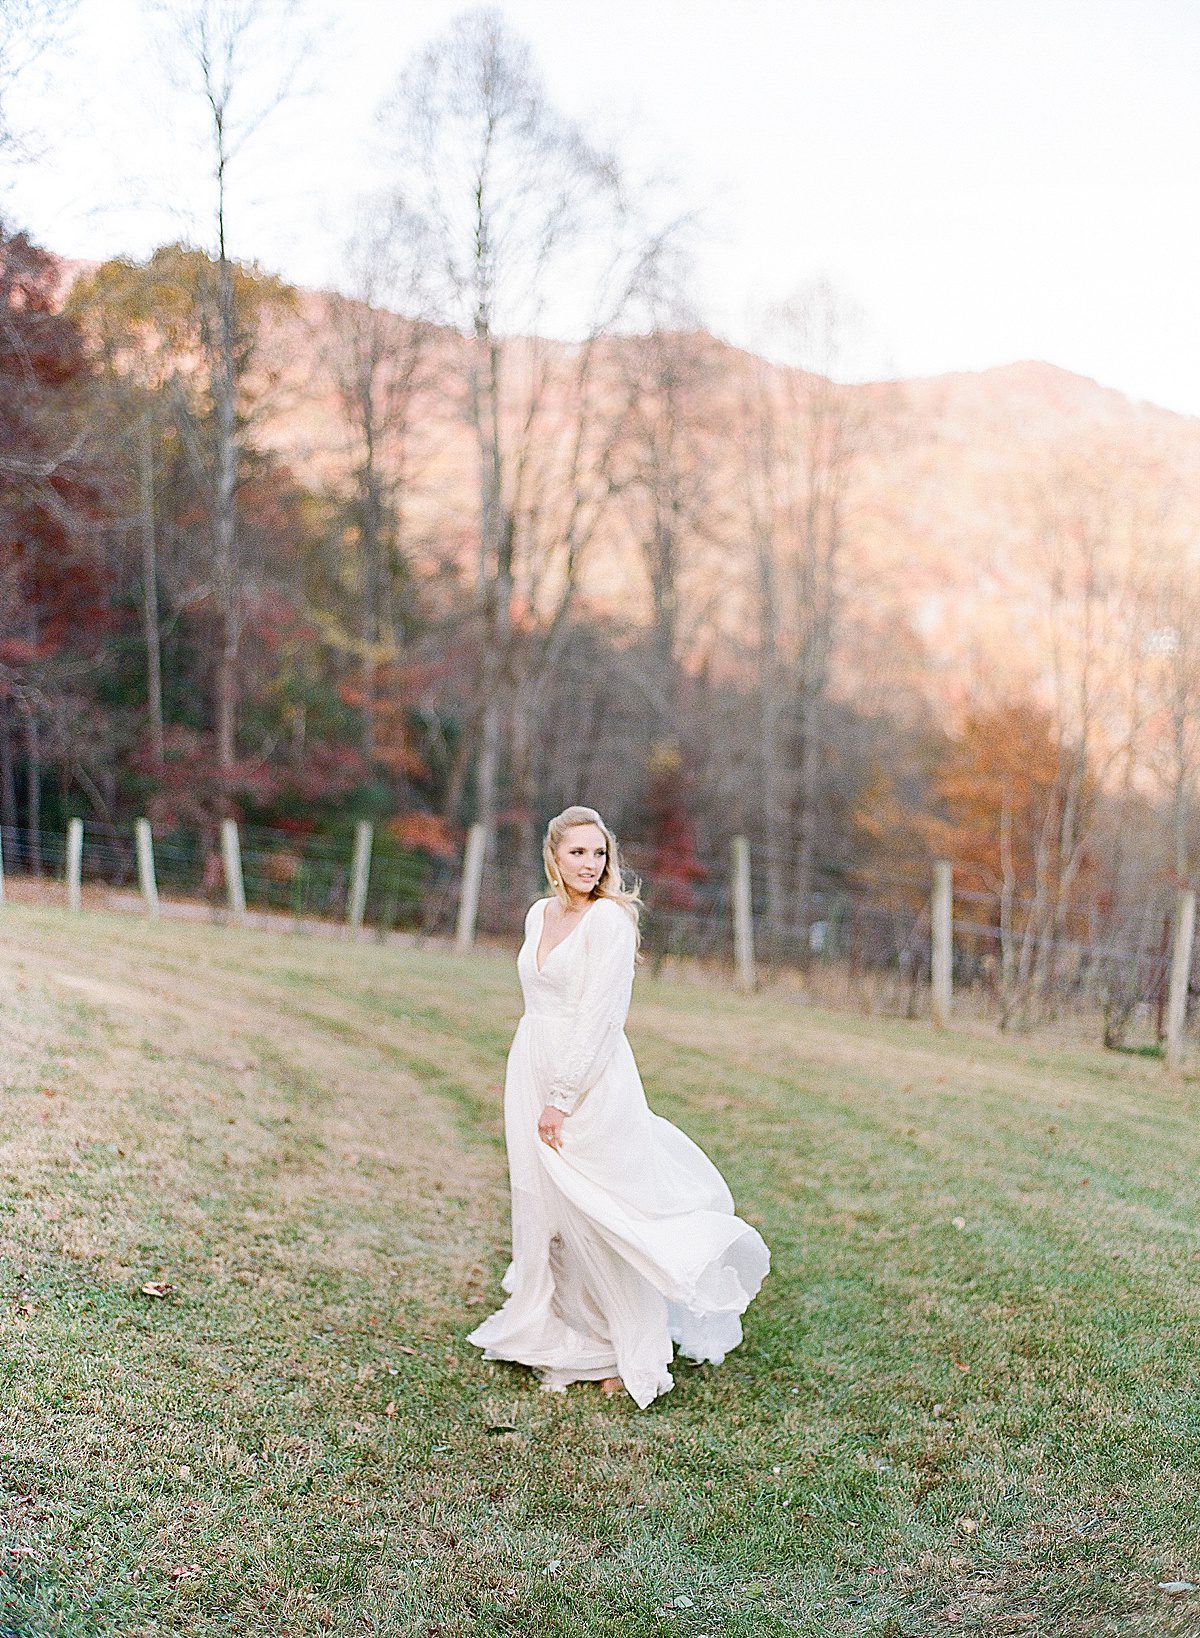 Bride with Dress Blowing in the Wind Photo